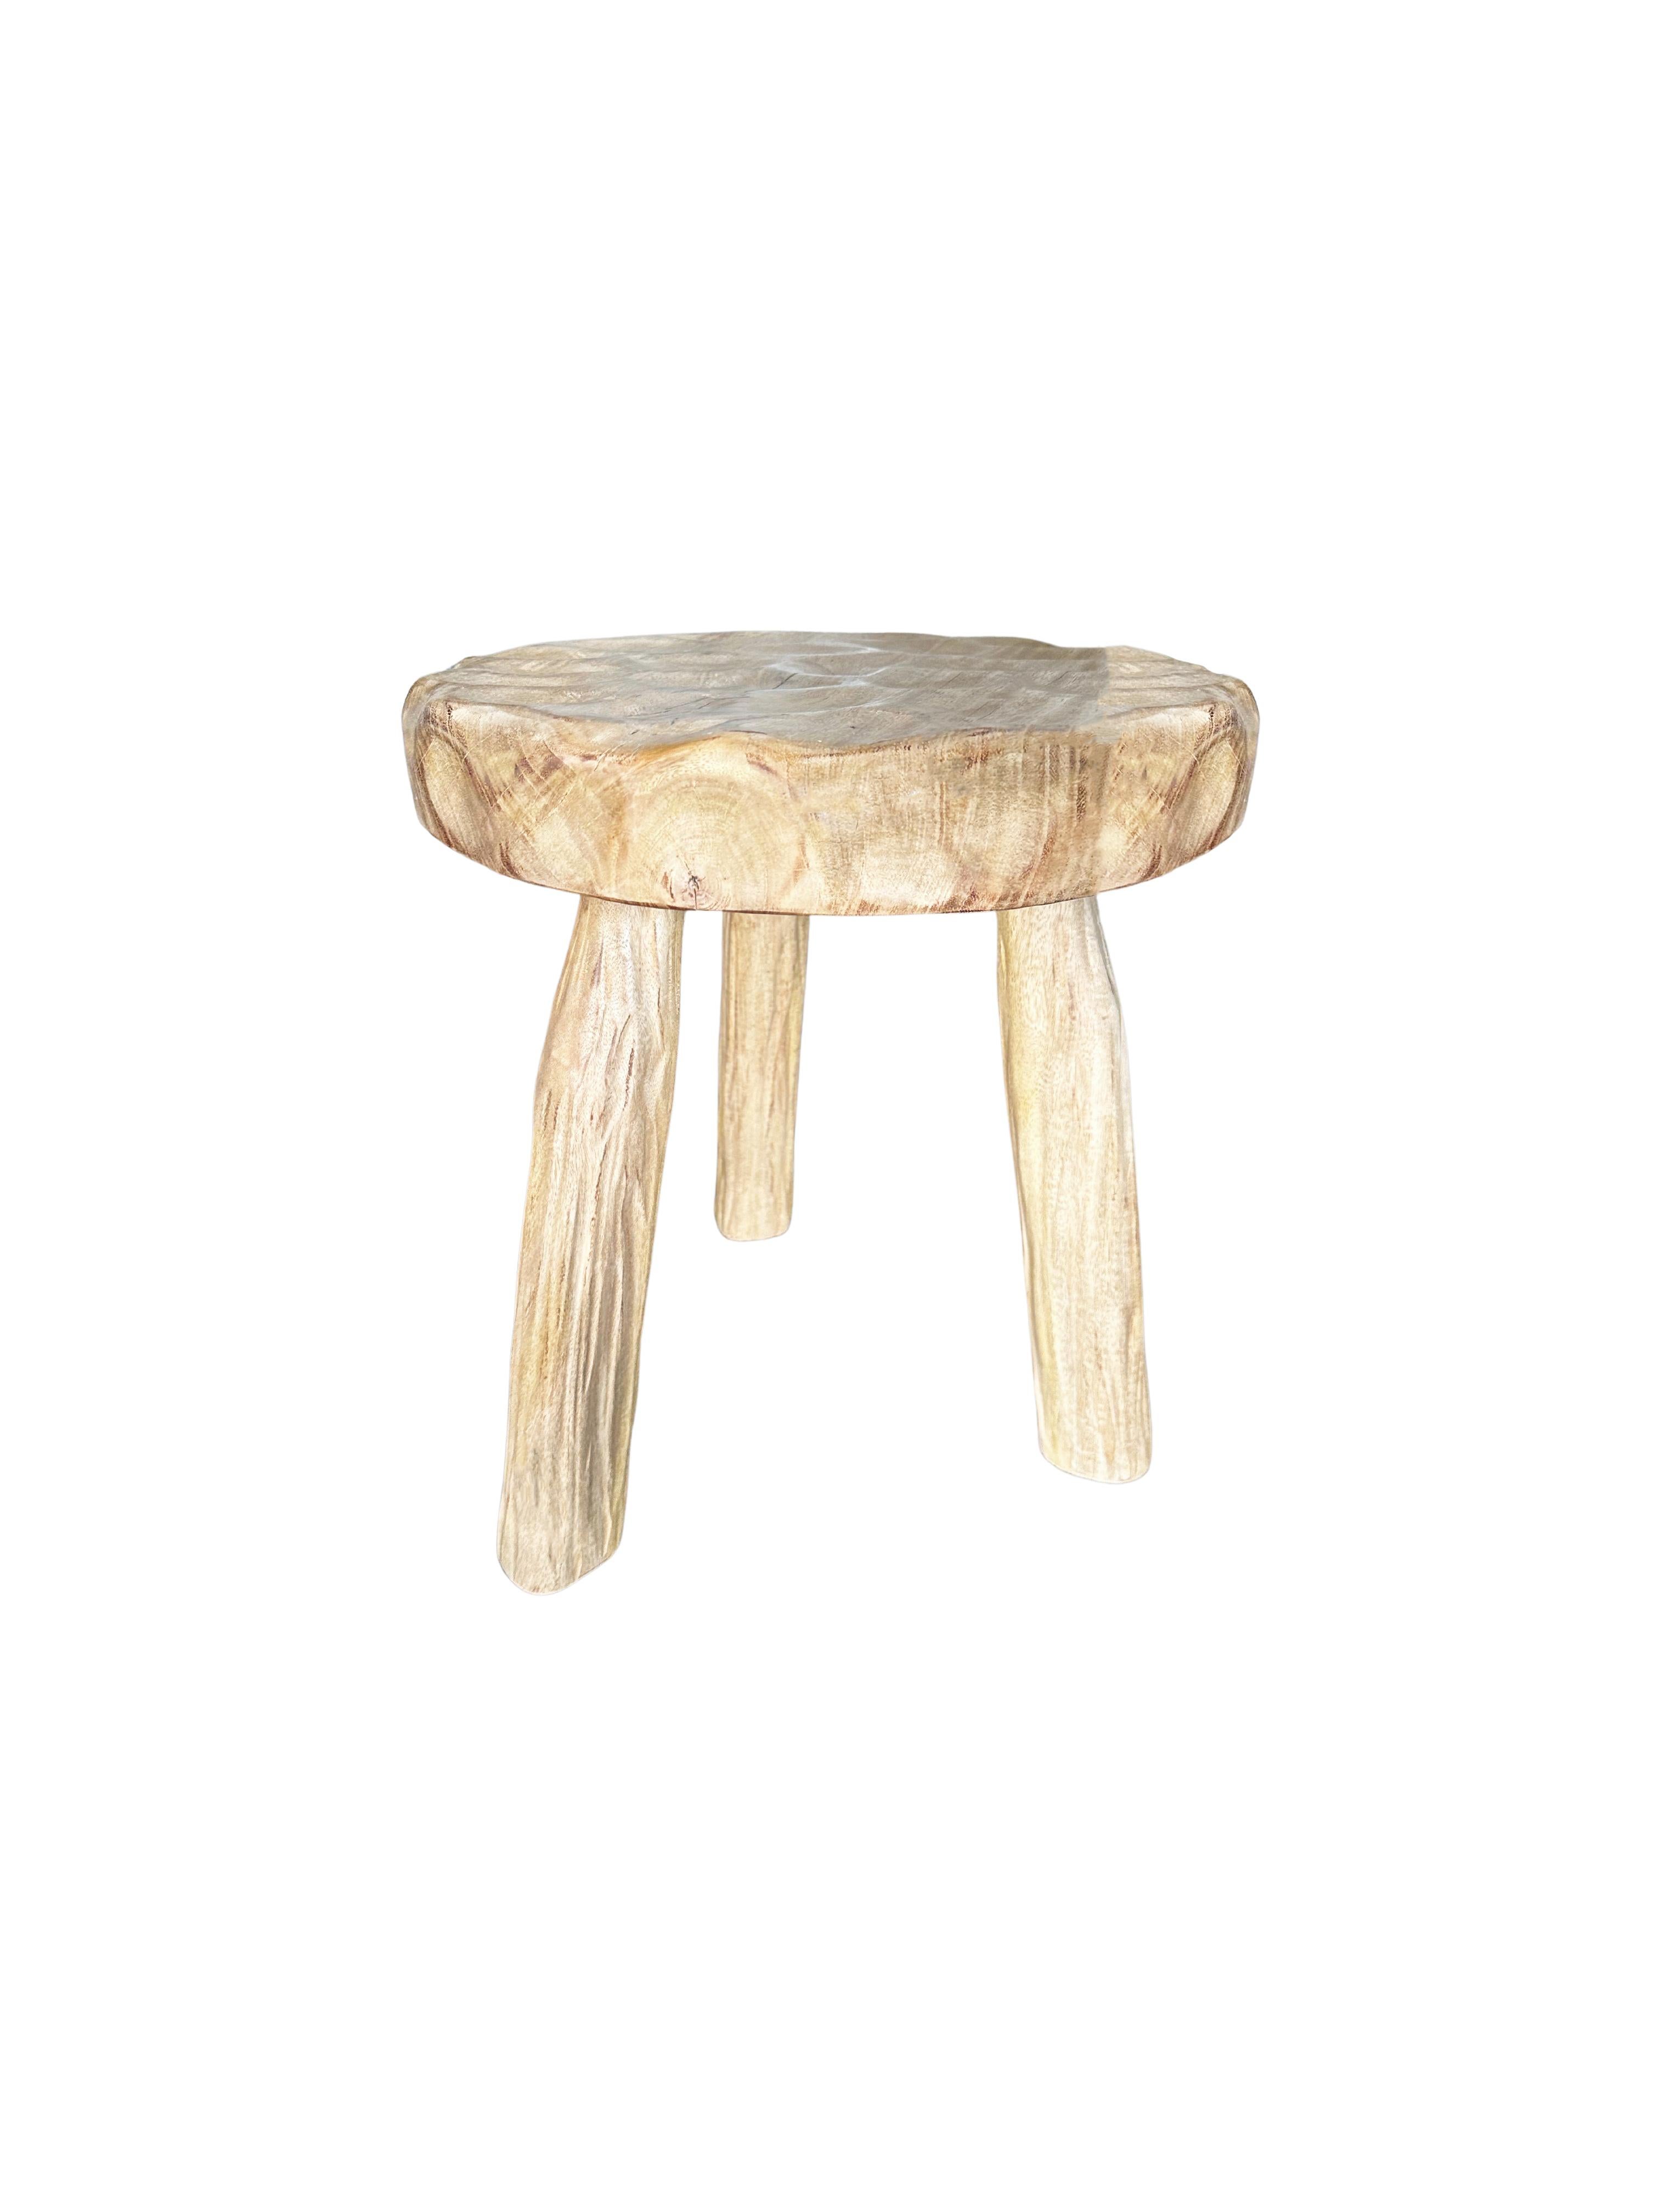 Indonesian Sculptural Stool Solid Mango Wood, Hand-Hewn Detailing, Modern Organic For Sale